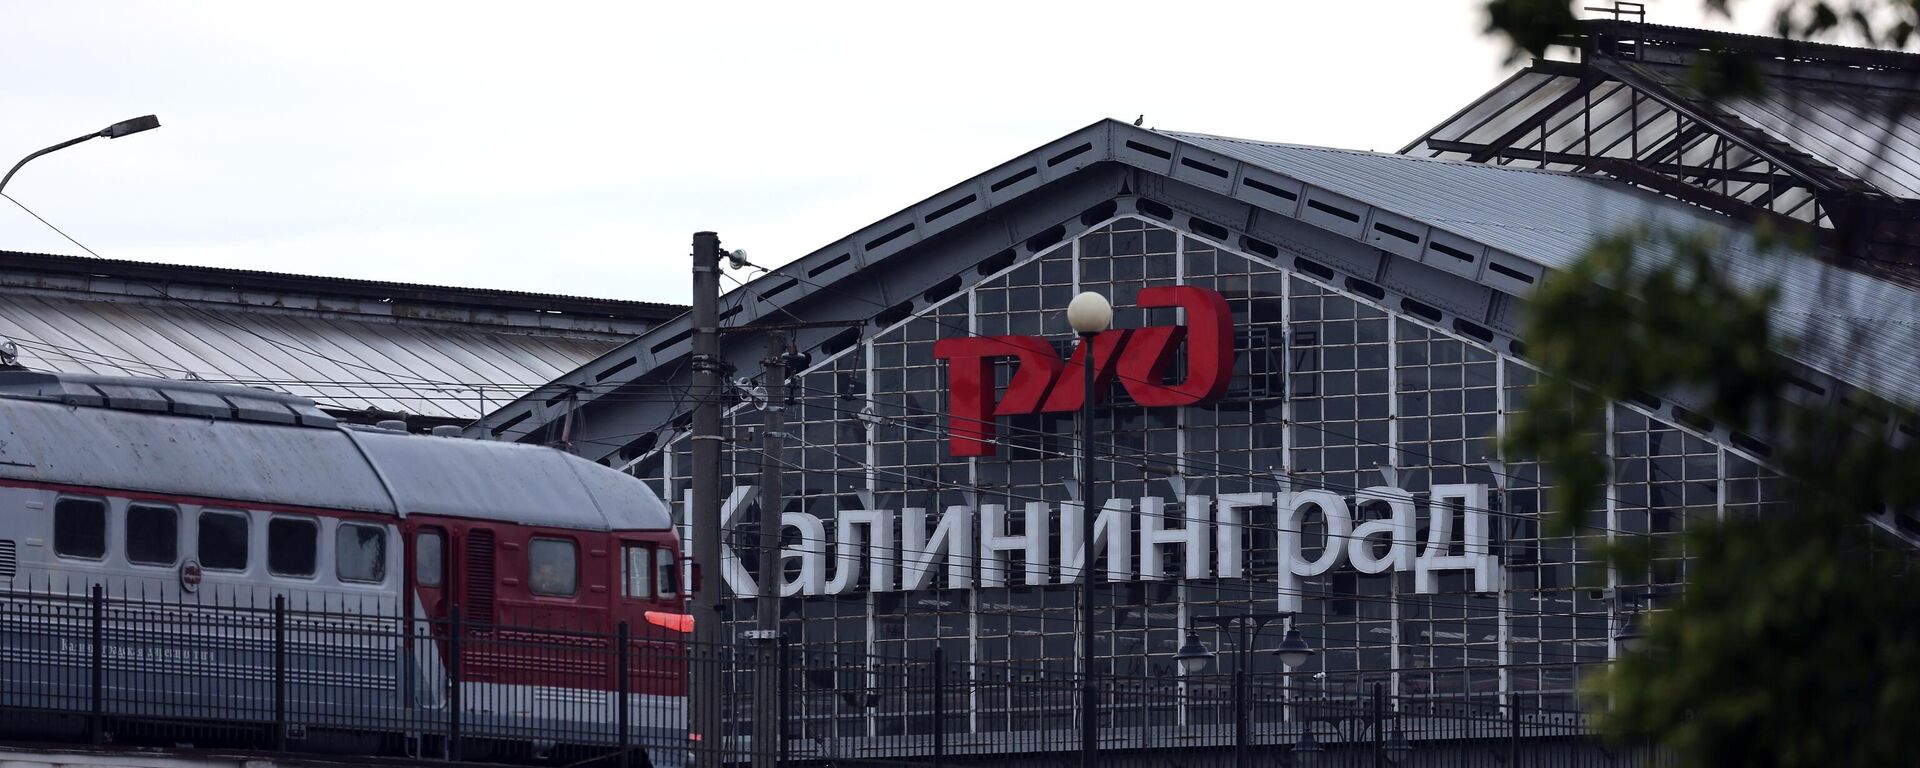 The logo of the Rassian Railways and inscription Kaliningrad are seen on the roof gable of the railway station in Kaliningrad, Russia. Lithuania says ban on rail cargo transit from Russia to Kaliningrad directed by EU. - Sputnik International, 1920, 23.09.2022